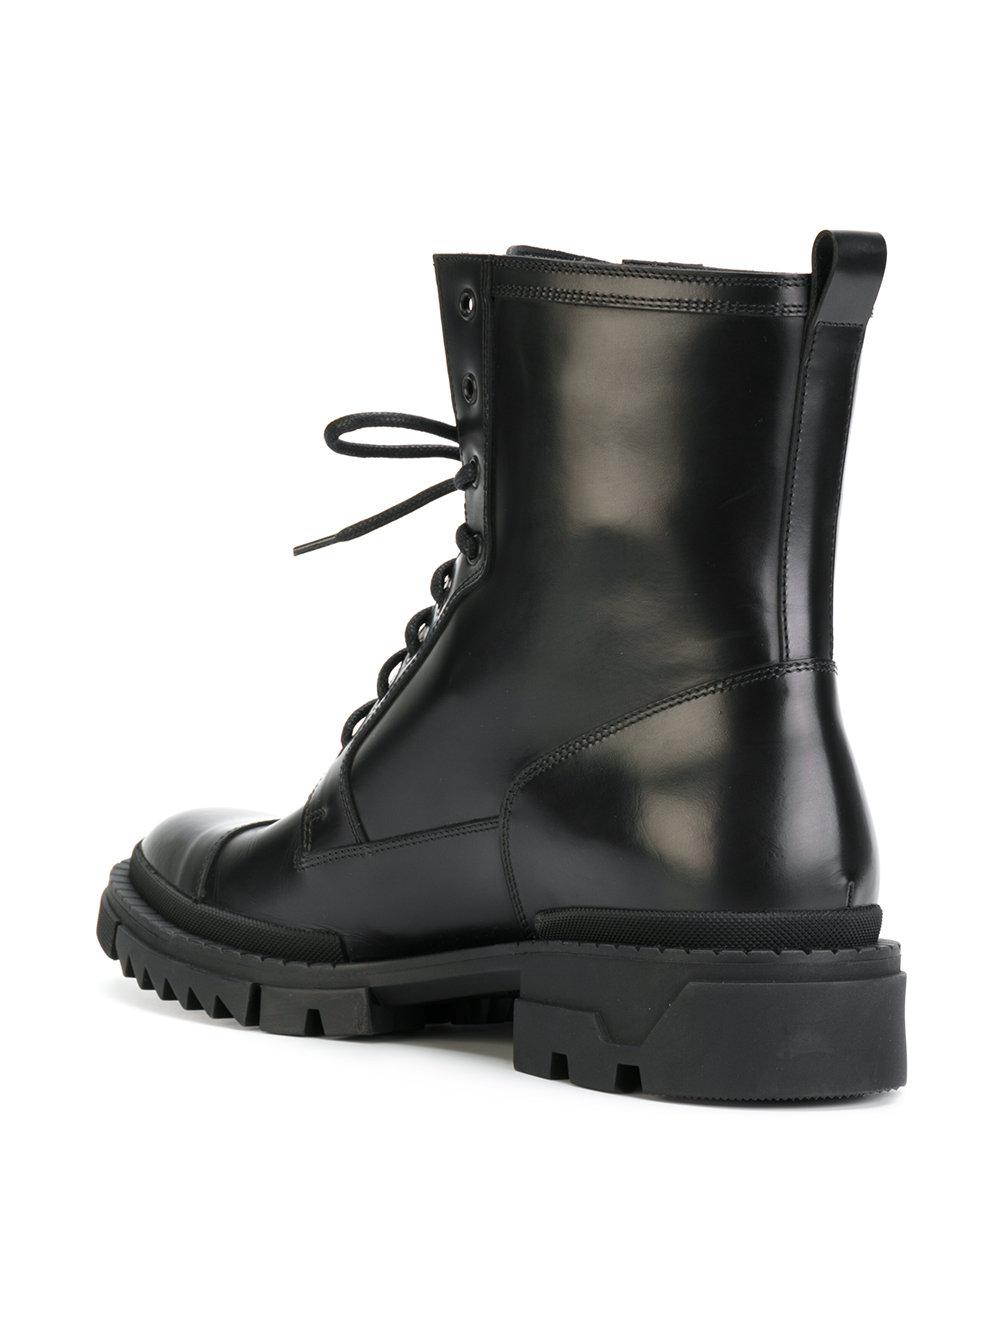 Versace Leather Cargo Boots in Black for Men - Lyst